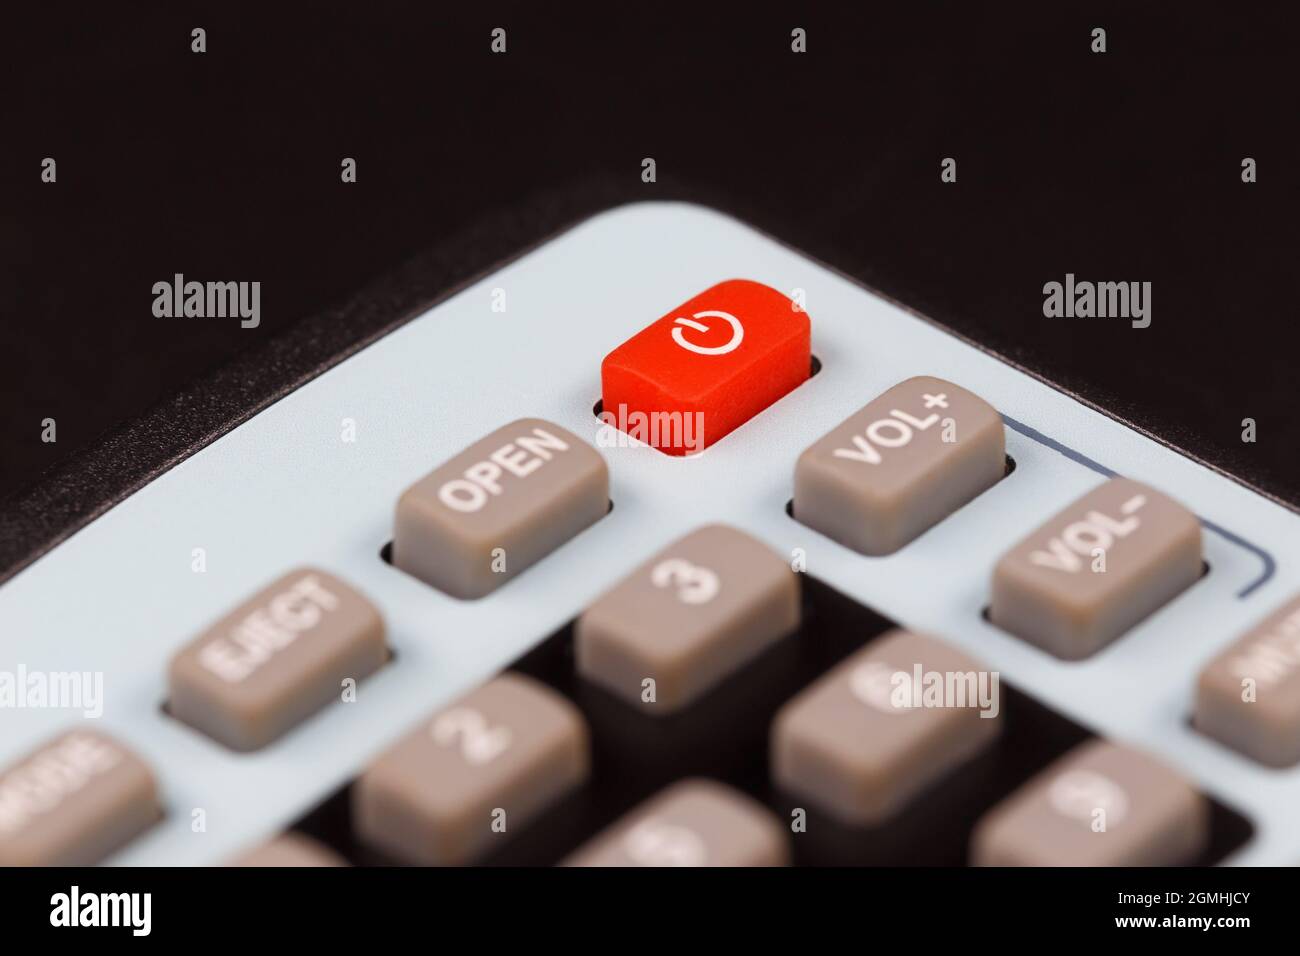 Red on / off button on the remote control close-up Stock Photo